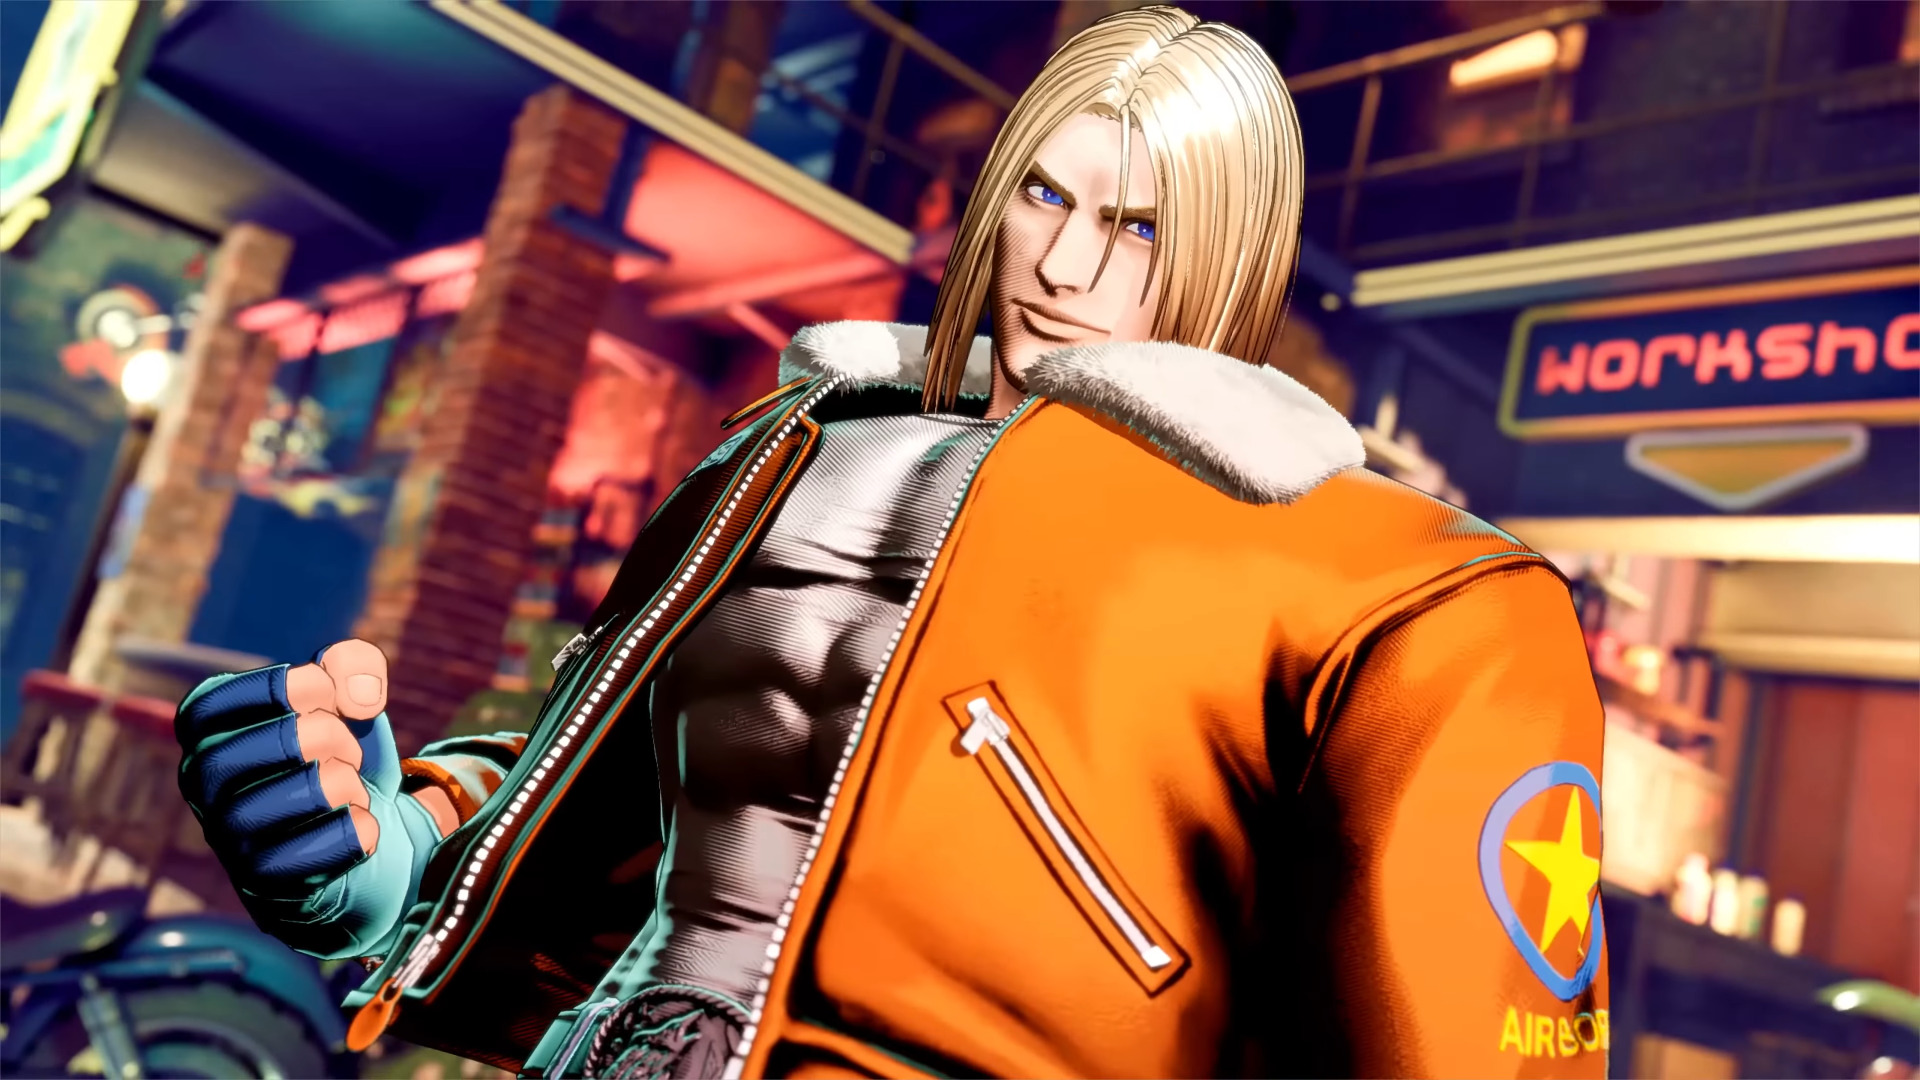 Over 20 years later, we're getting a new Fatal Fury game